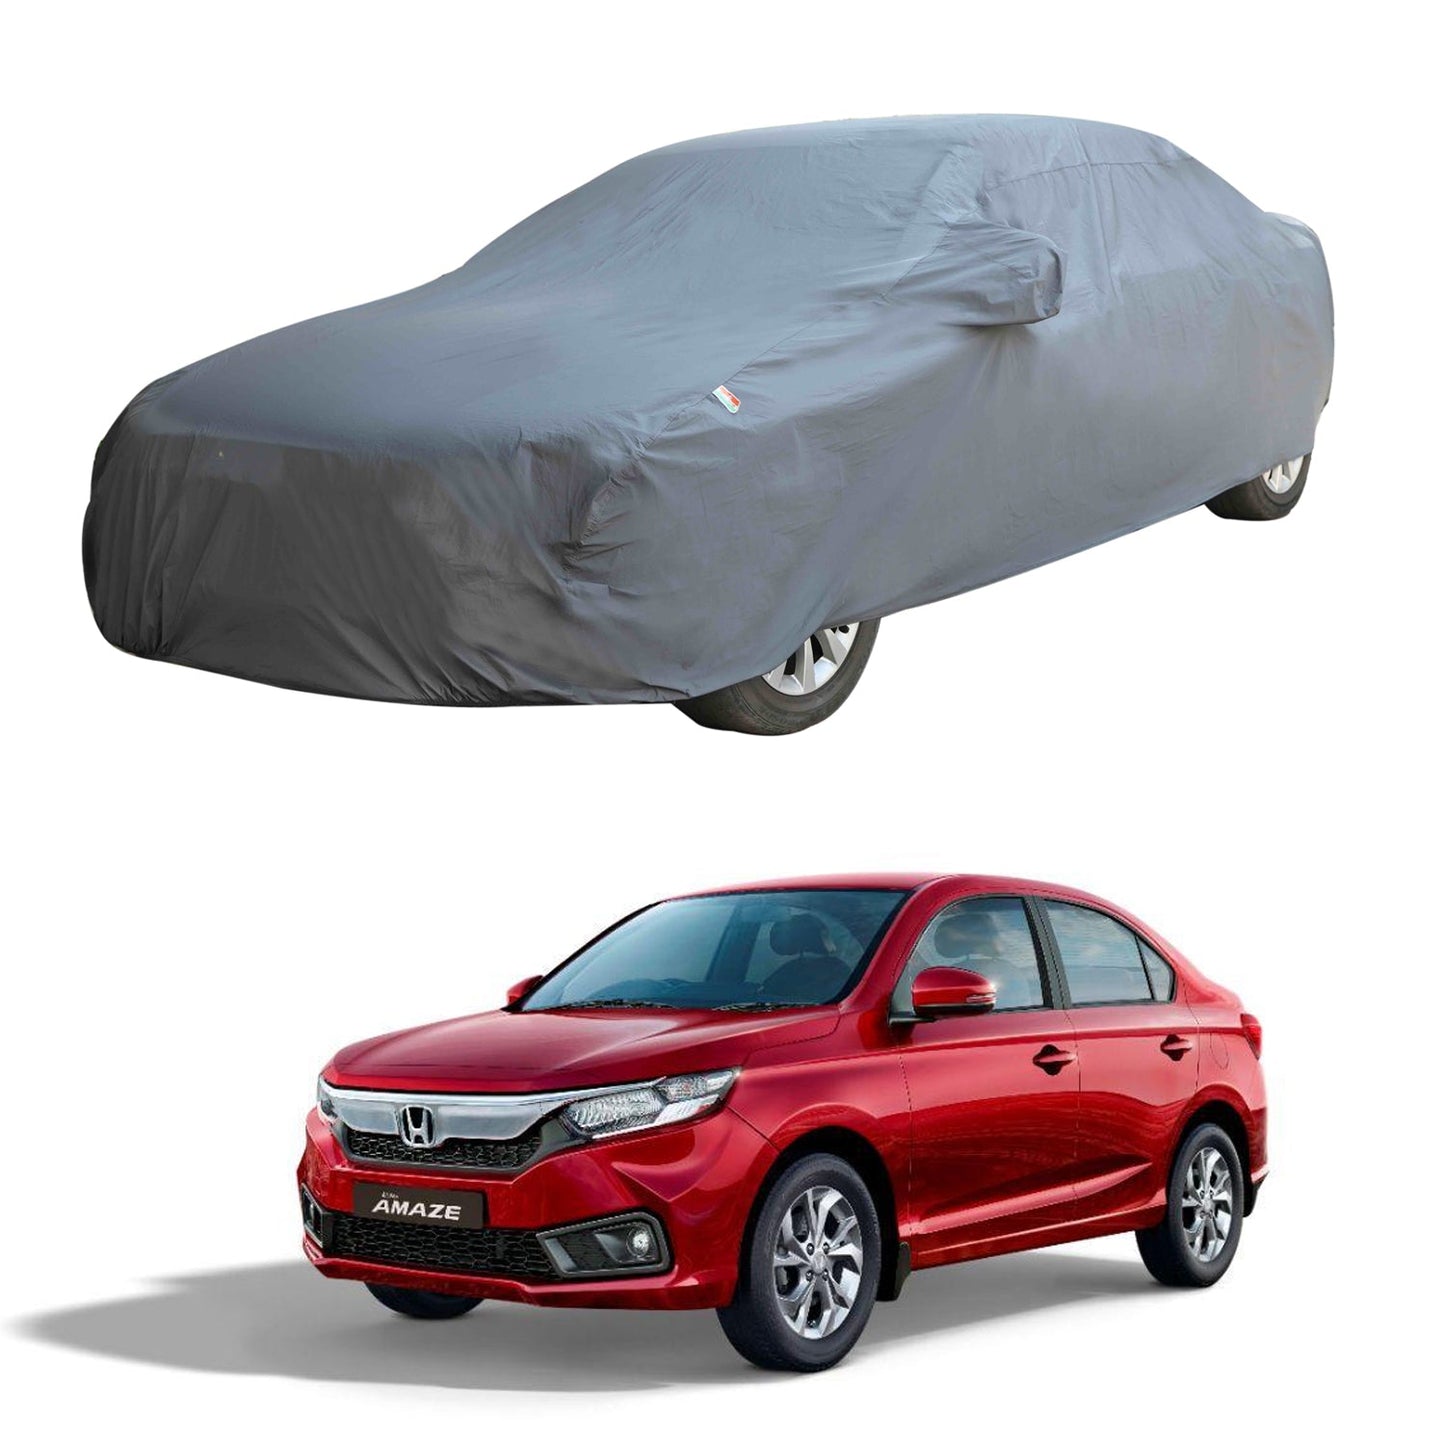 Oshotto Dark Grey 100% Anti Reflective, dustproof and Water Proof Car Body Cover with Mirror Pockets For Honda Amaze 2018-2023